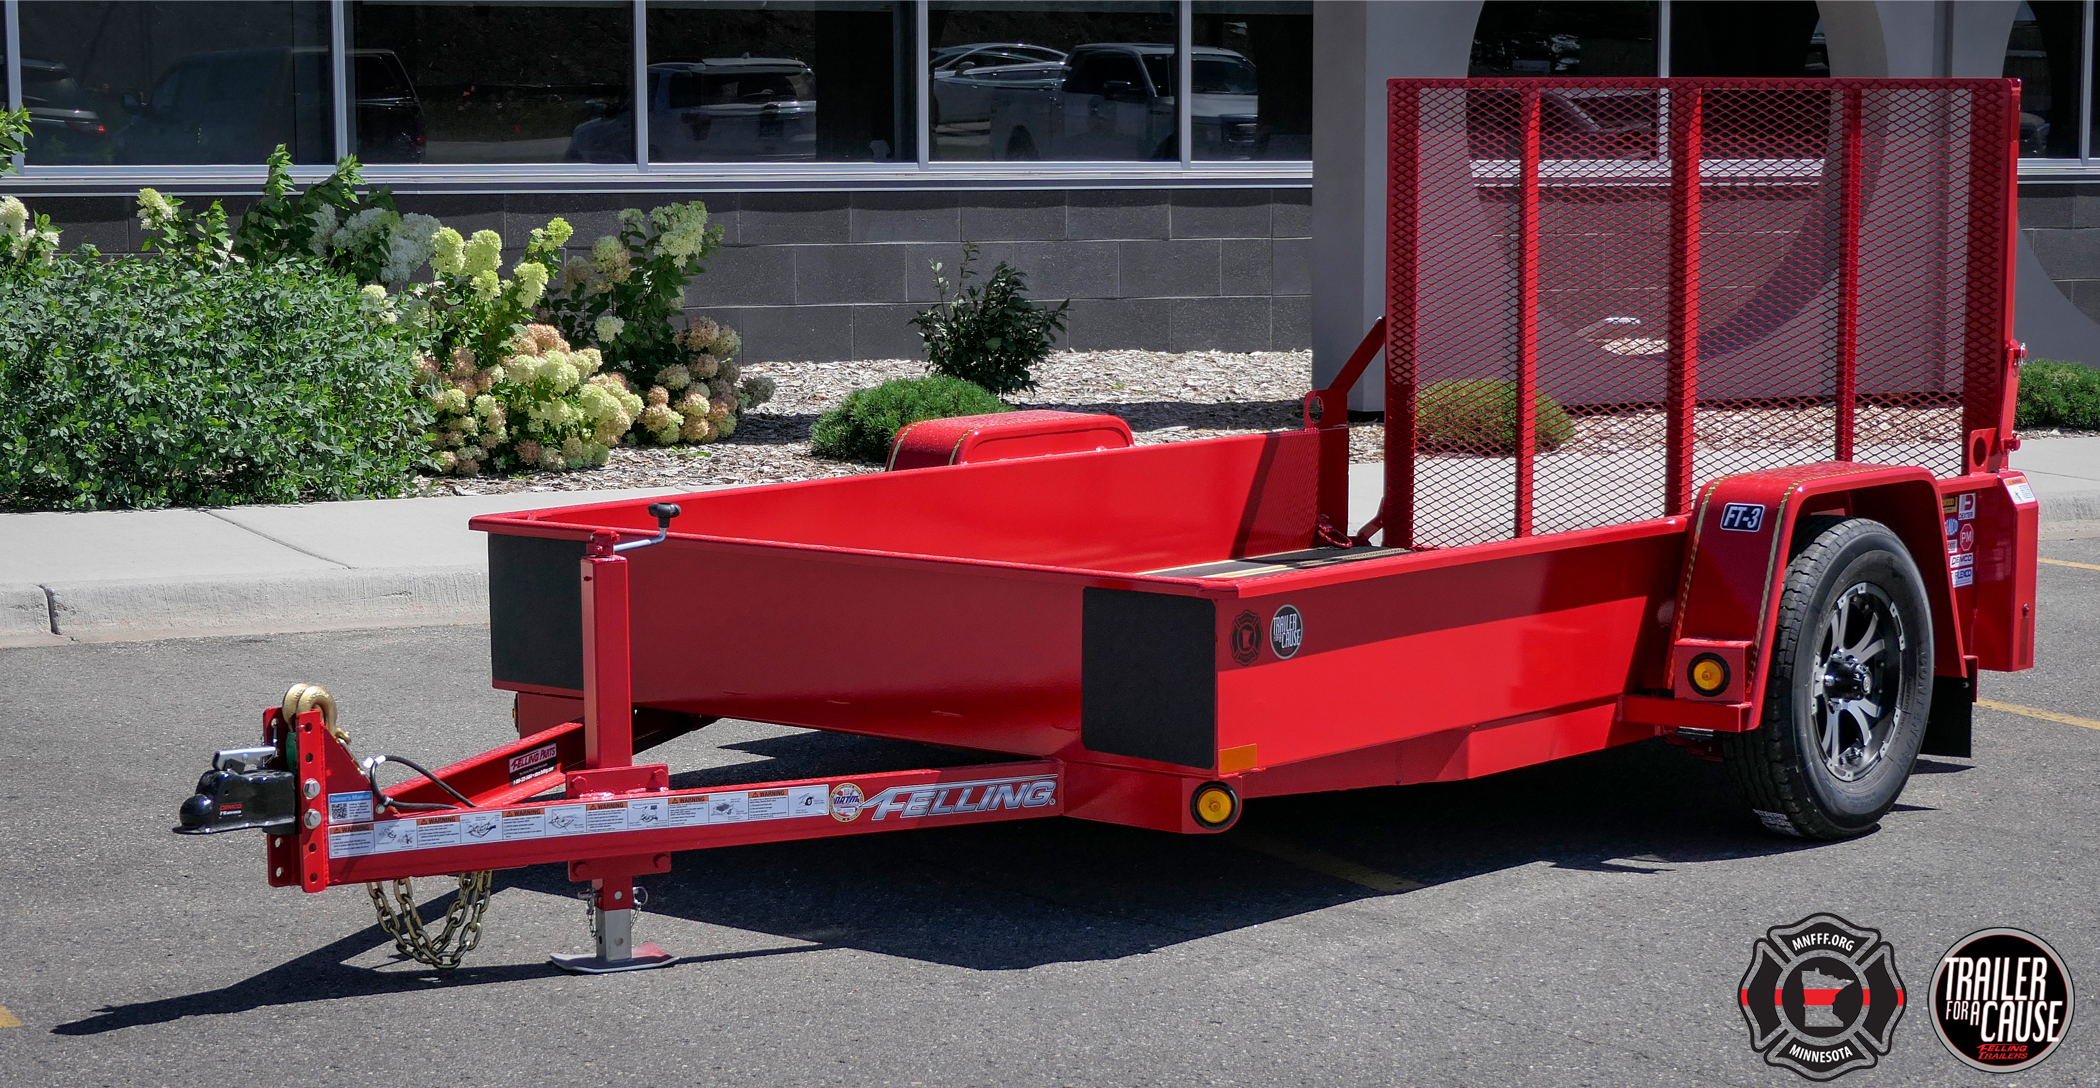 Trailer for Cause, of an FT-3 drop deck utility trailer to benefit a non-profit organization. Minnesota Fire Fighters